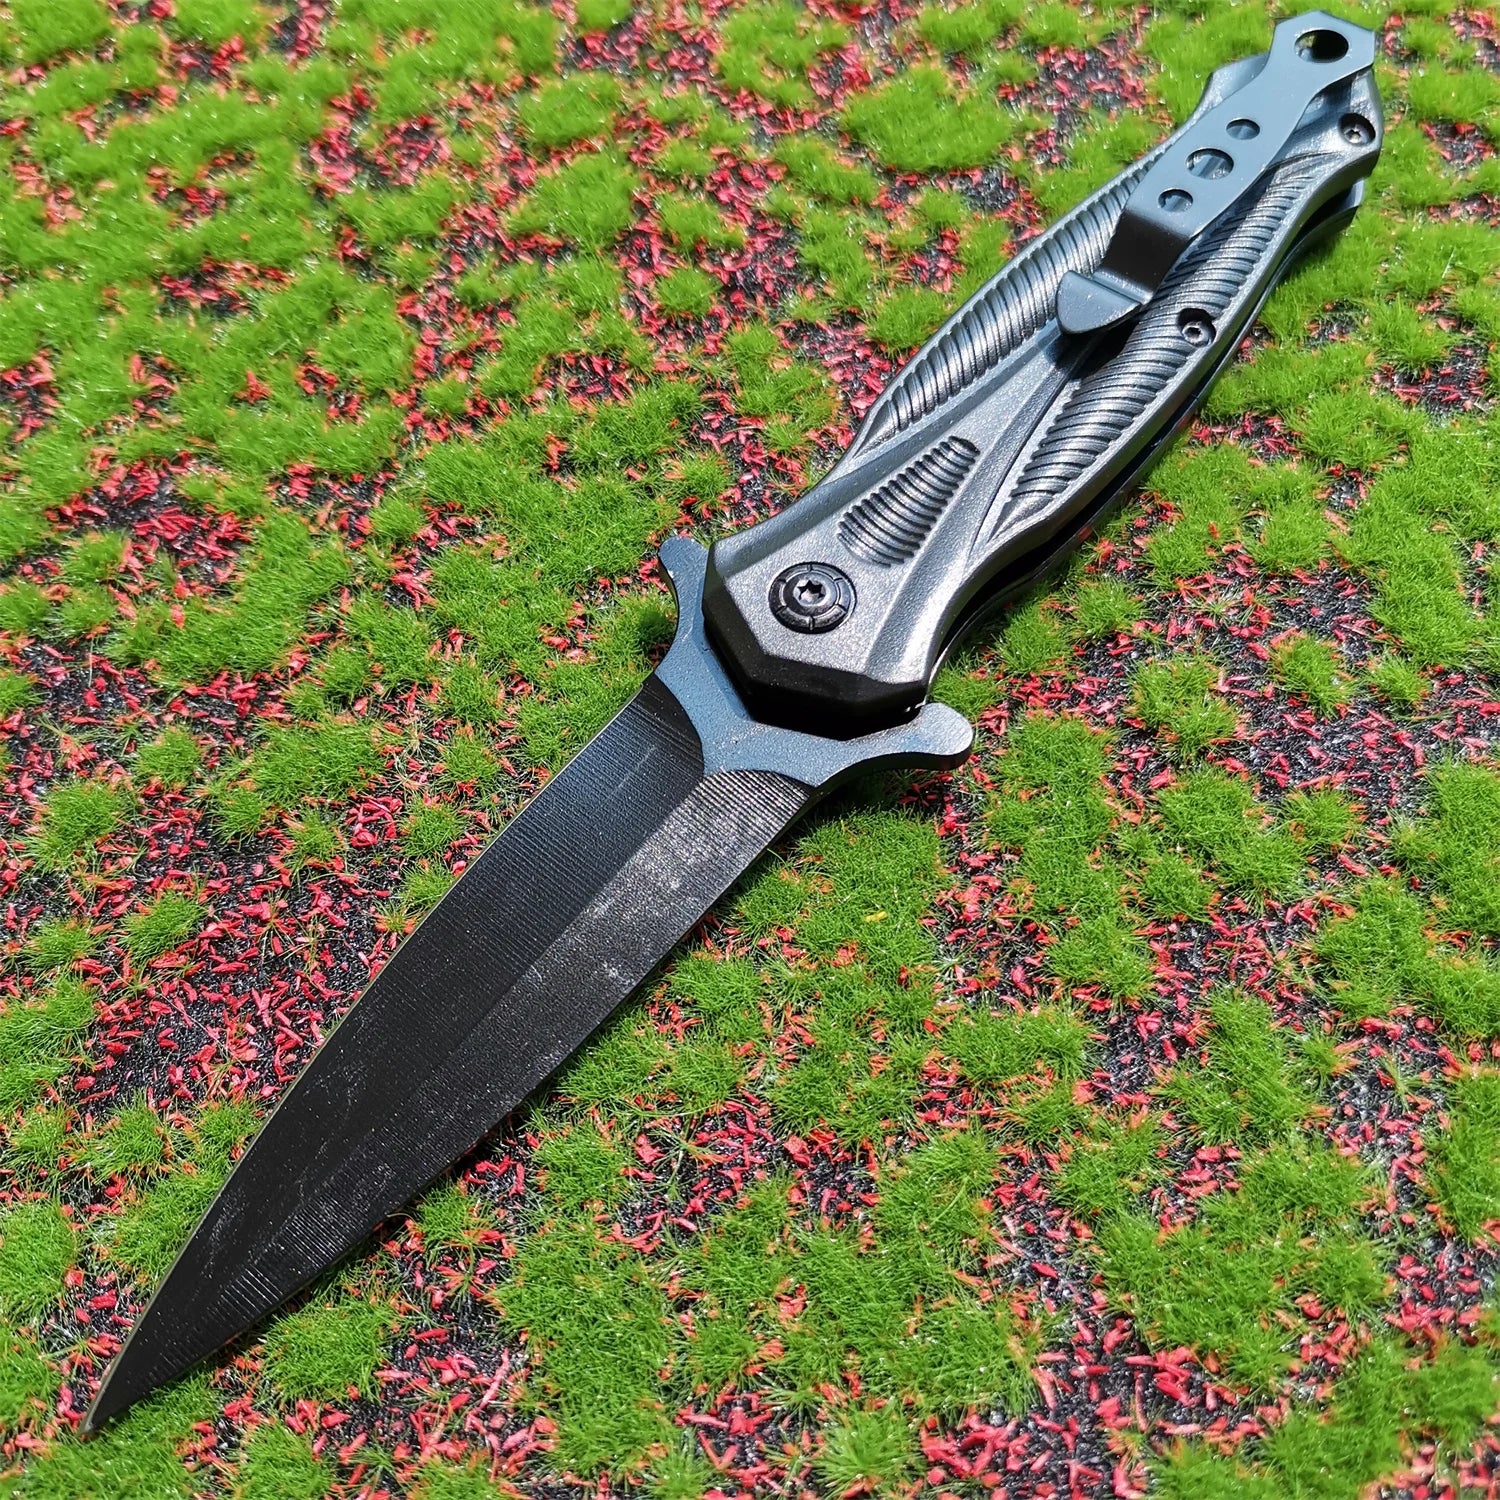 Tactical Folding Knife High Hardness Sharp Blade Hiking Camping Survival Knife Portable Knife ABS + Aluminum Alloy Knife Handle